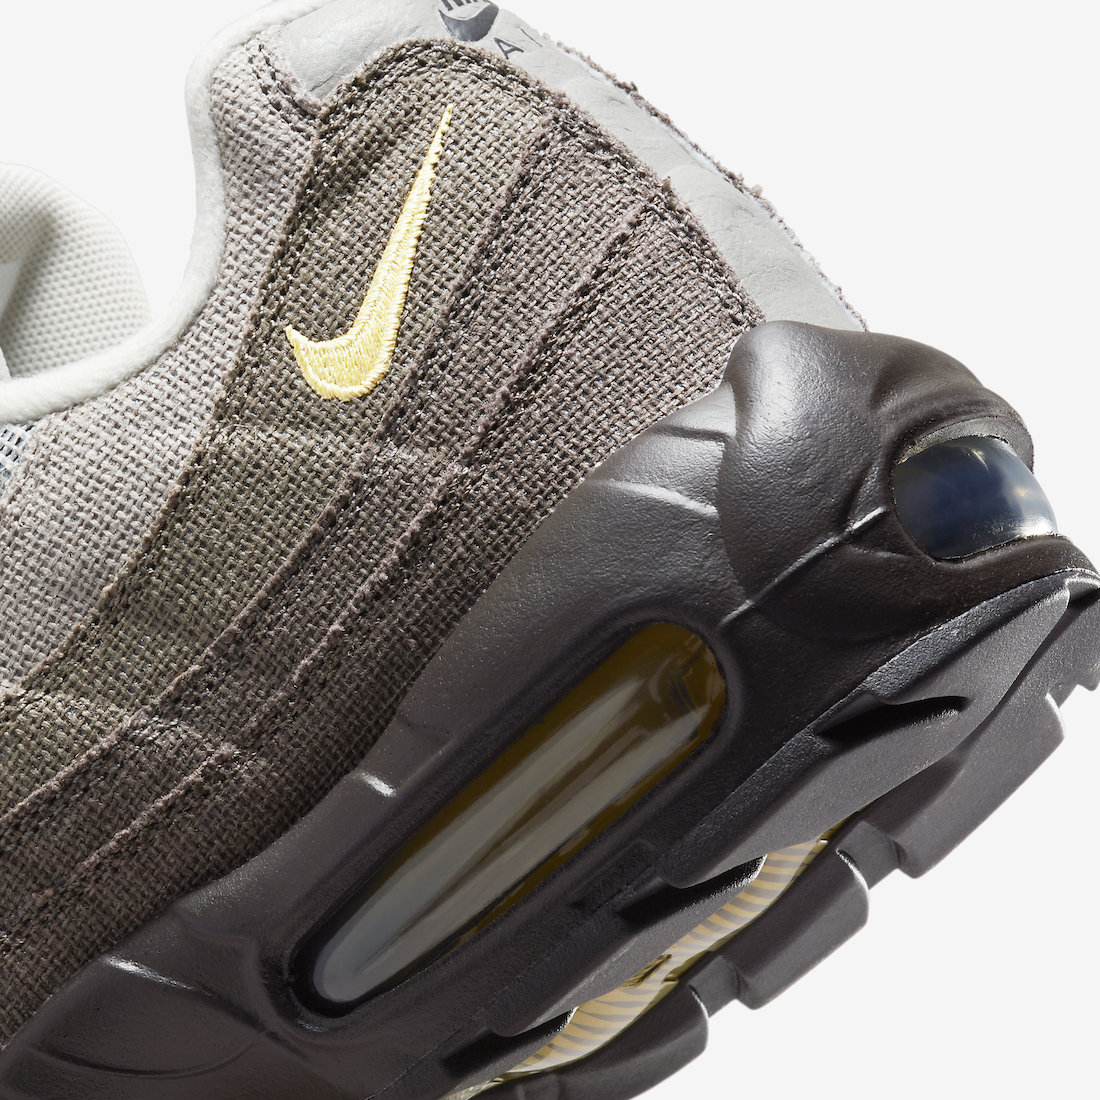 Nike-Air-Max-95-Ironstone-Celery-Cave-Stone-Olive-Grey-DR0146-001-Release-Date-7